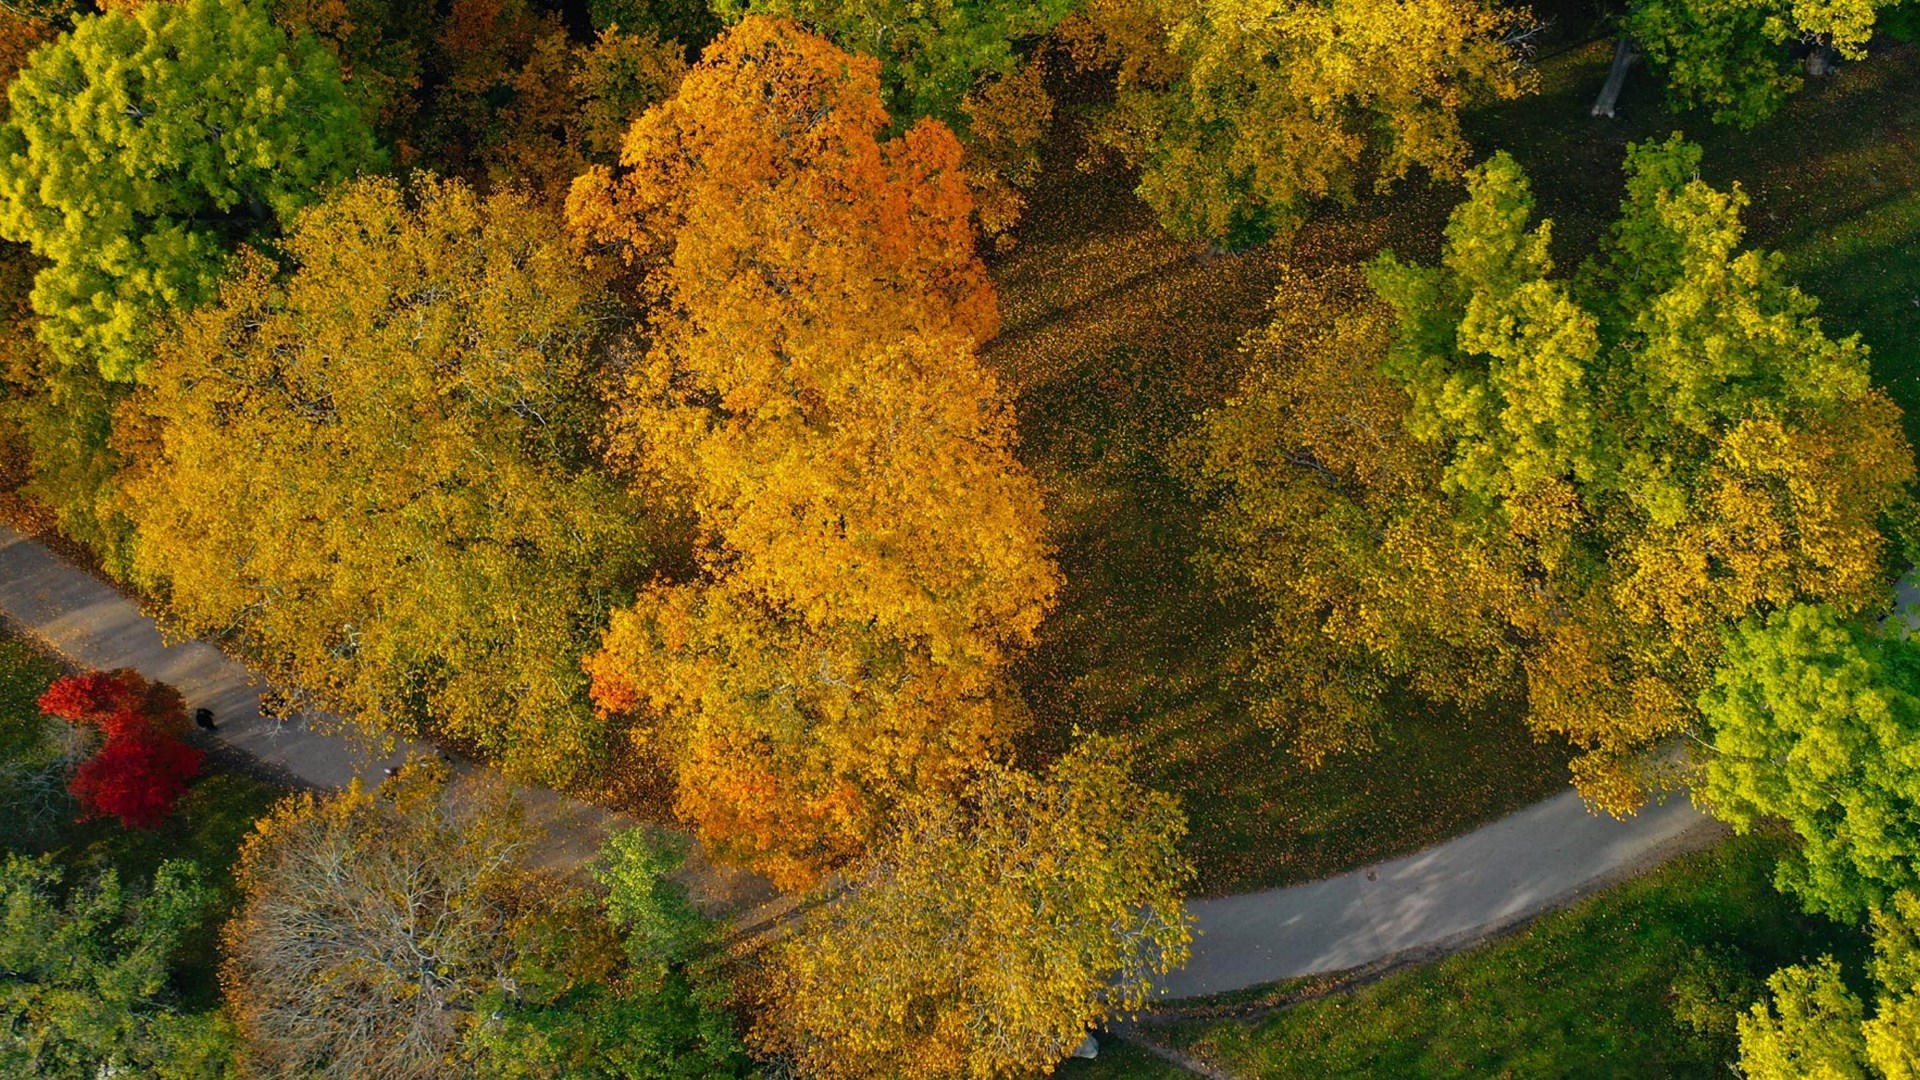 An autumn picture of a park seen from above. We see a walkway that meanders through the picture, and tree tops in different shades of green, yellow and orange.